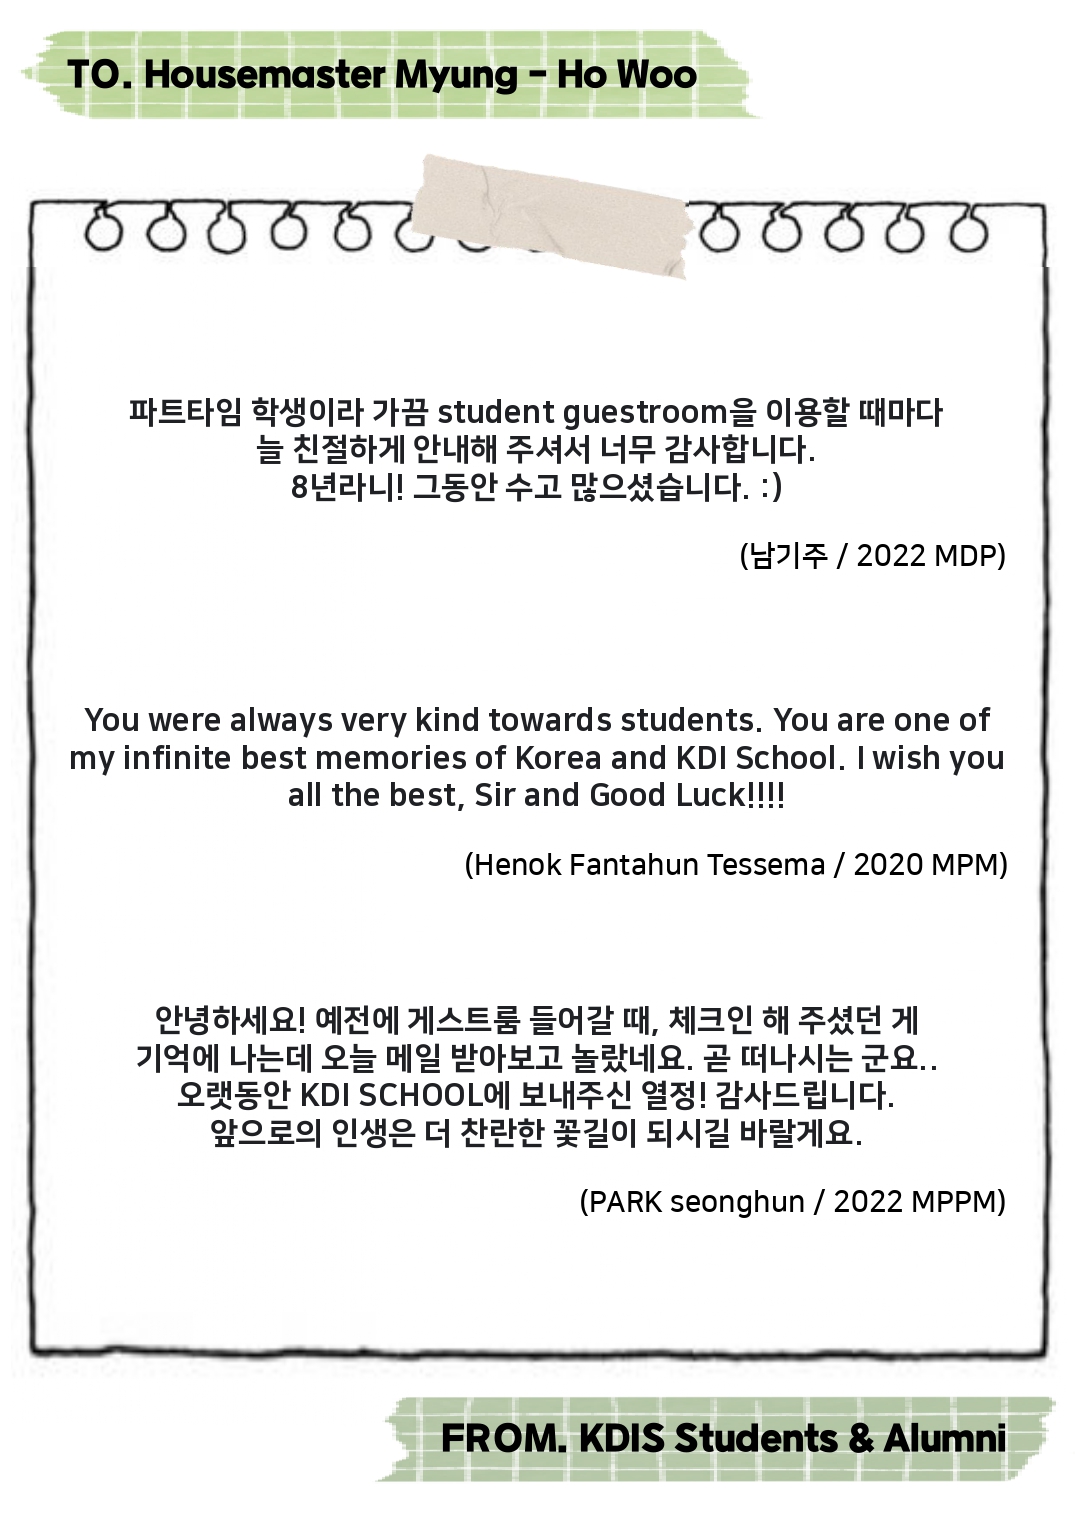 Thank you Housemaster Myung-ho Woo -Messages from KDIS Students and Alumni 사진13